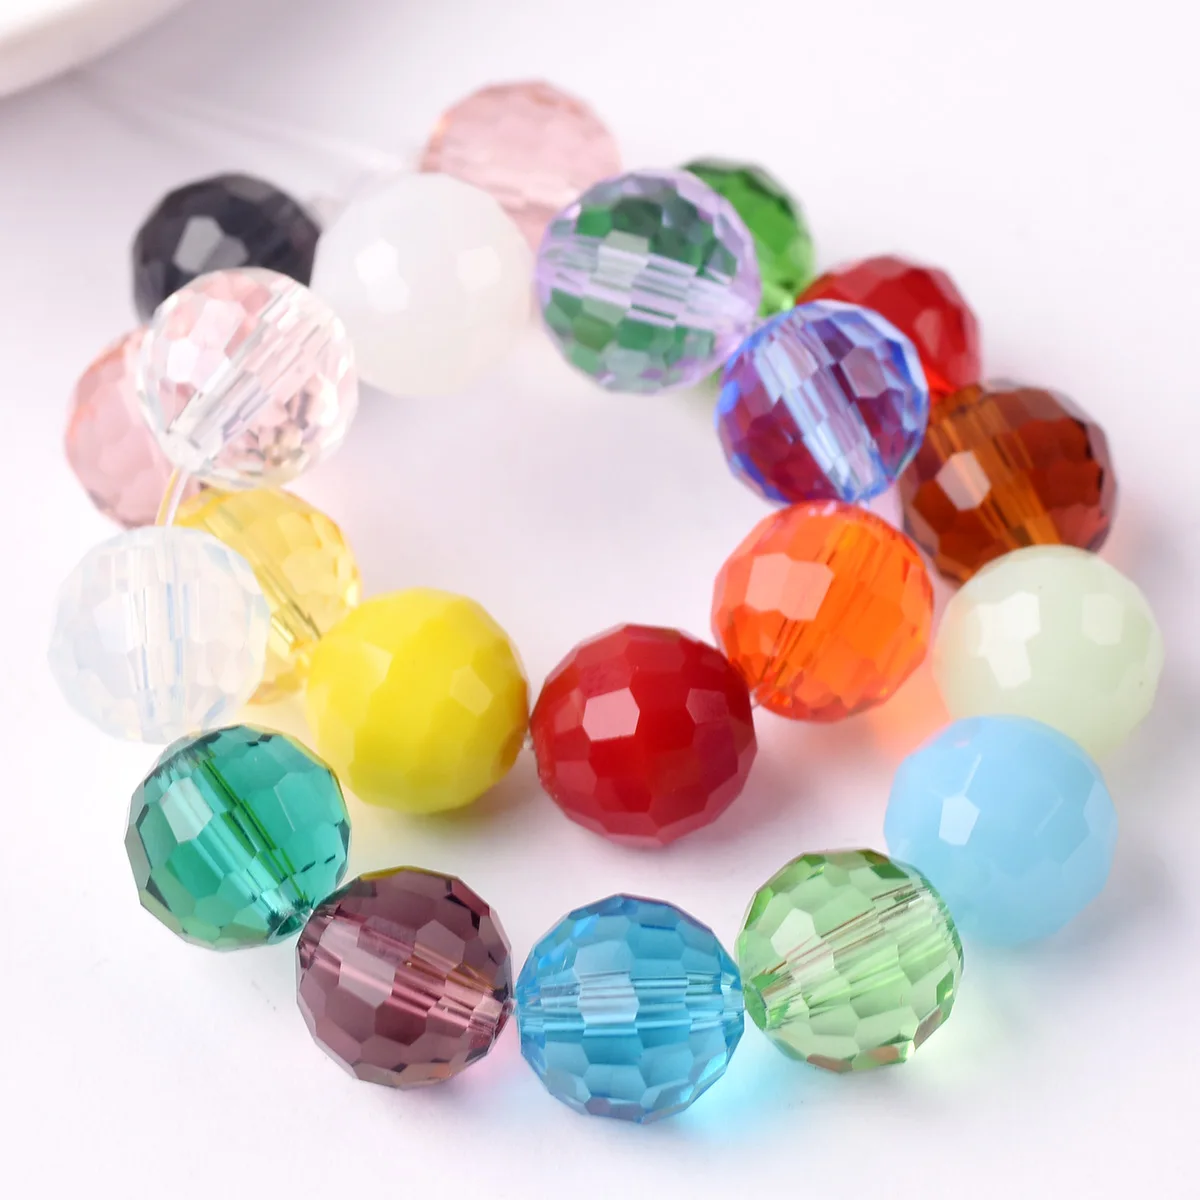 Round 96 Facets 6mm 8mm 10mm 12mm Faceted Crystal Glass Loose Spacer Beads Wholesale Bulk Lot For Jewelry Making Findings round 96 facets 6mm 8mm 10mm 12mm faceted crystal glass loose spacer beads wholesale bulk lot for jewelry making findings